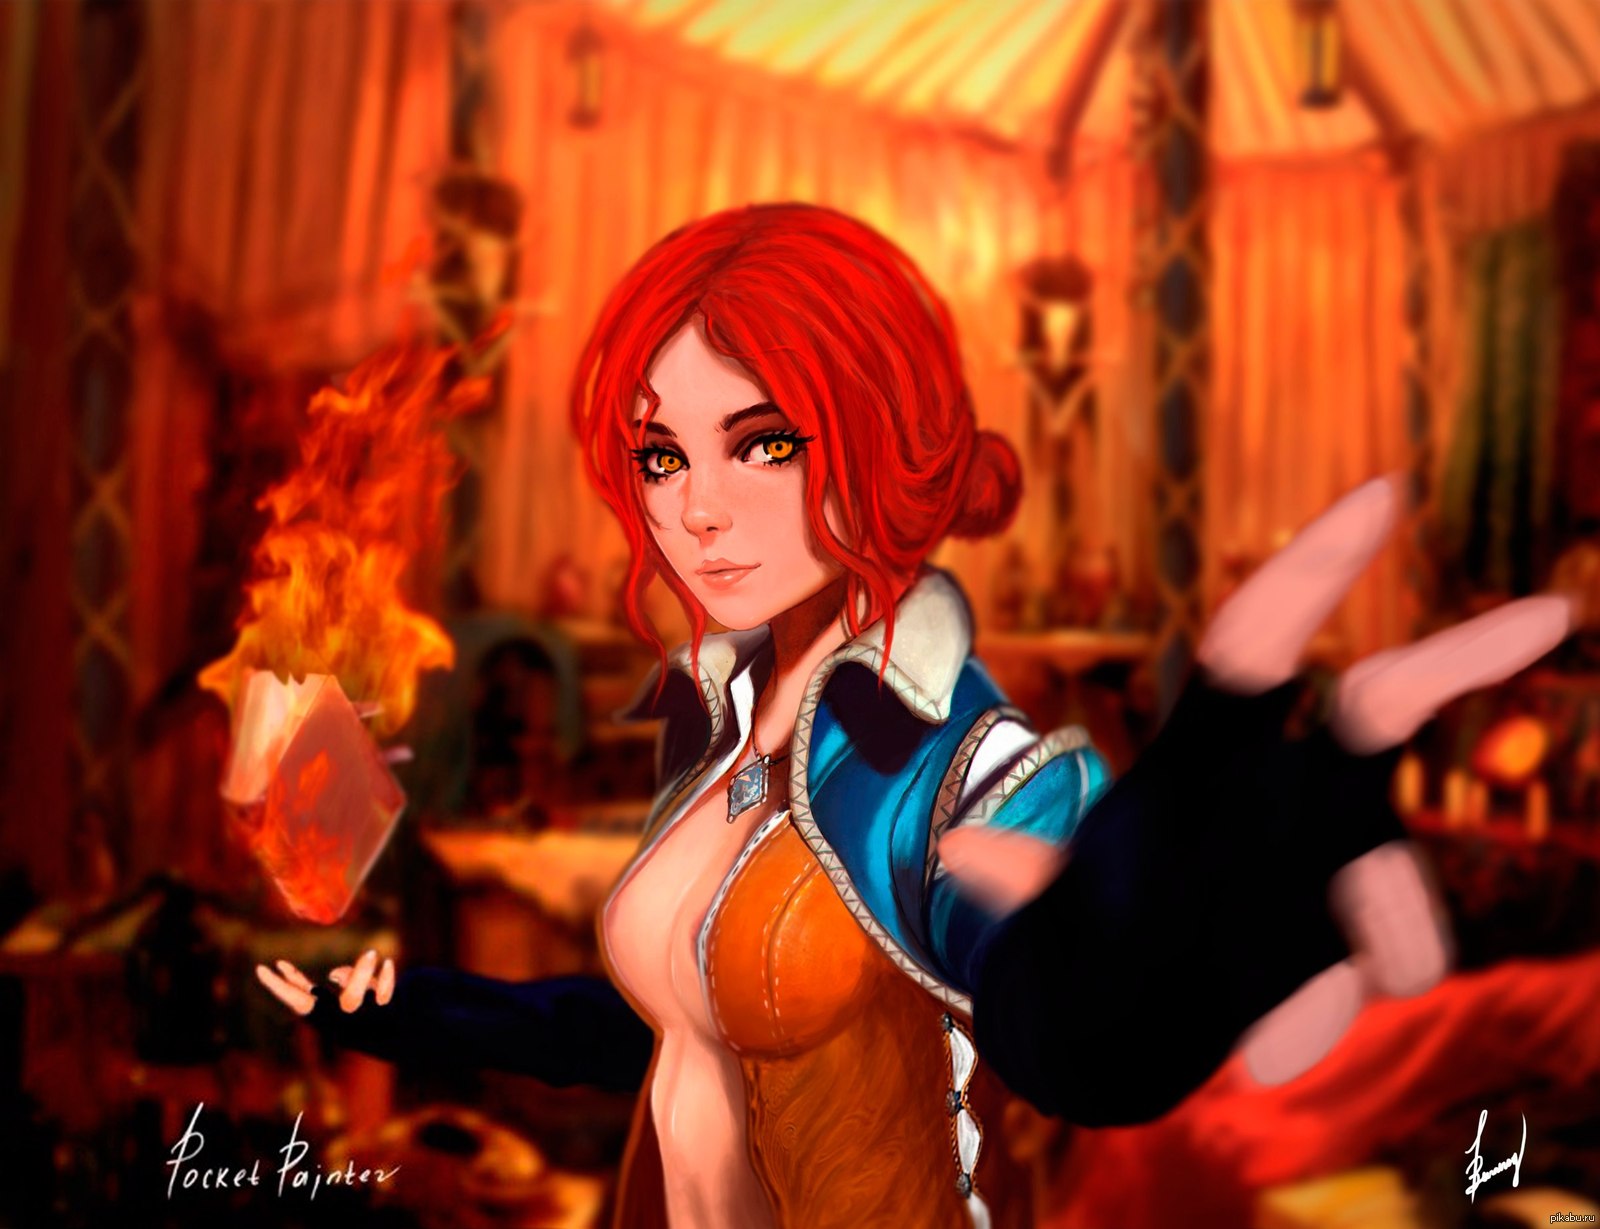 The Witcher - Triss Merigold - NSFW, My, , Art, Images, Anime, Games, Drawing, Anime art, The Witcher 3: Wild Hunt